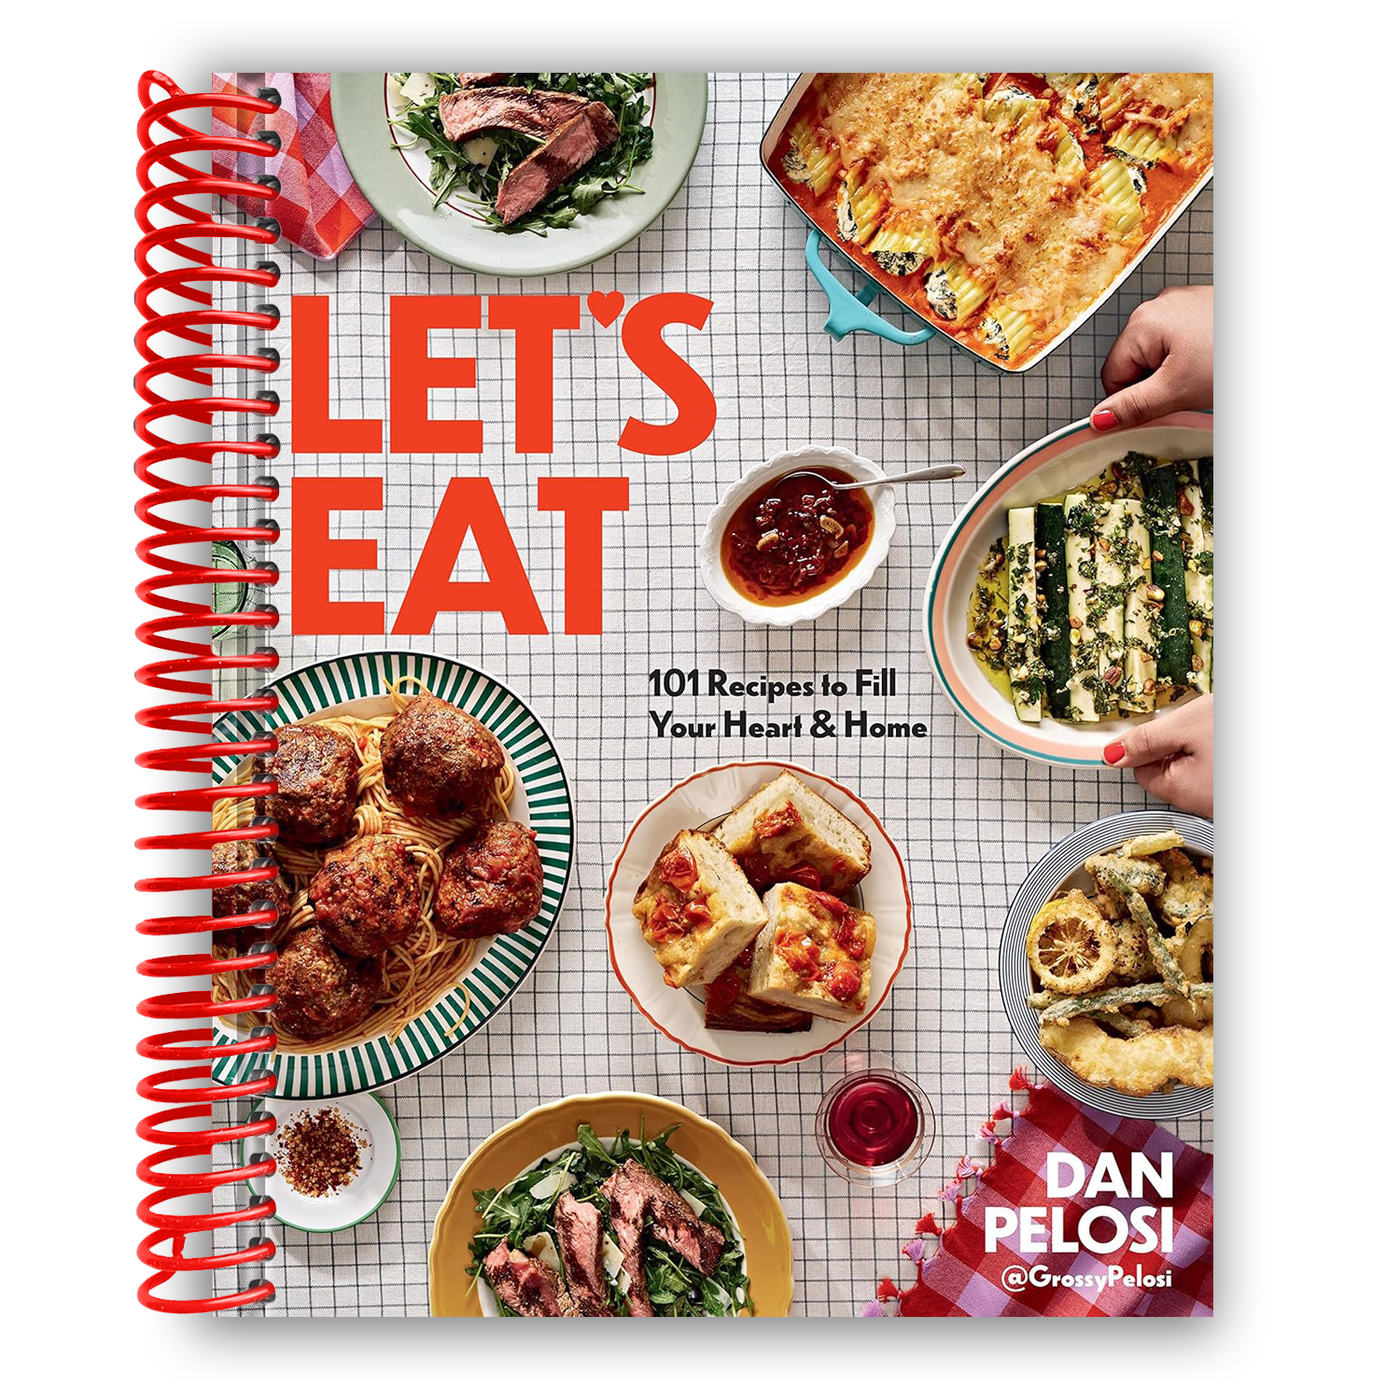 Let's Eat: 101 Recipes to Fill Your Heart & Home (Spiral Bound)